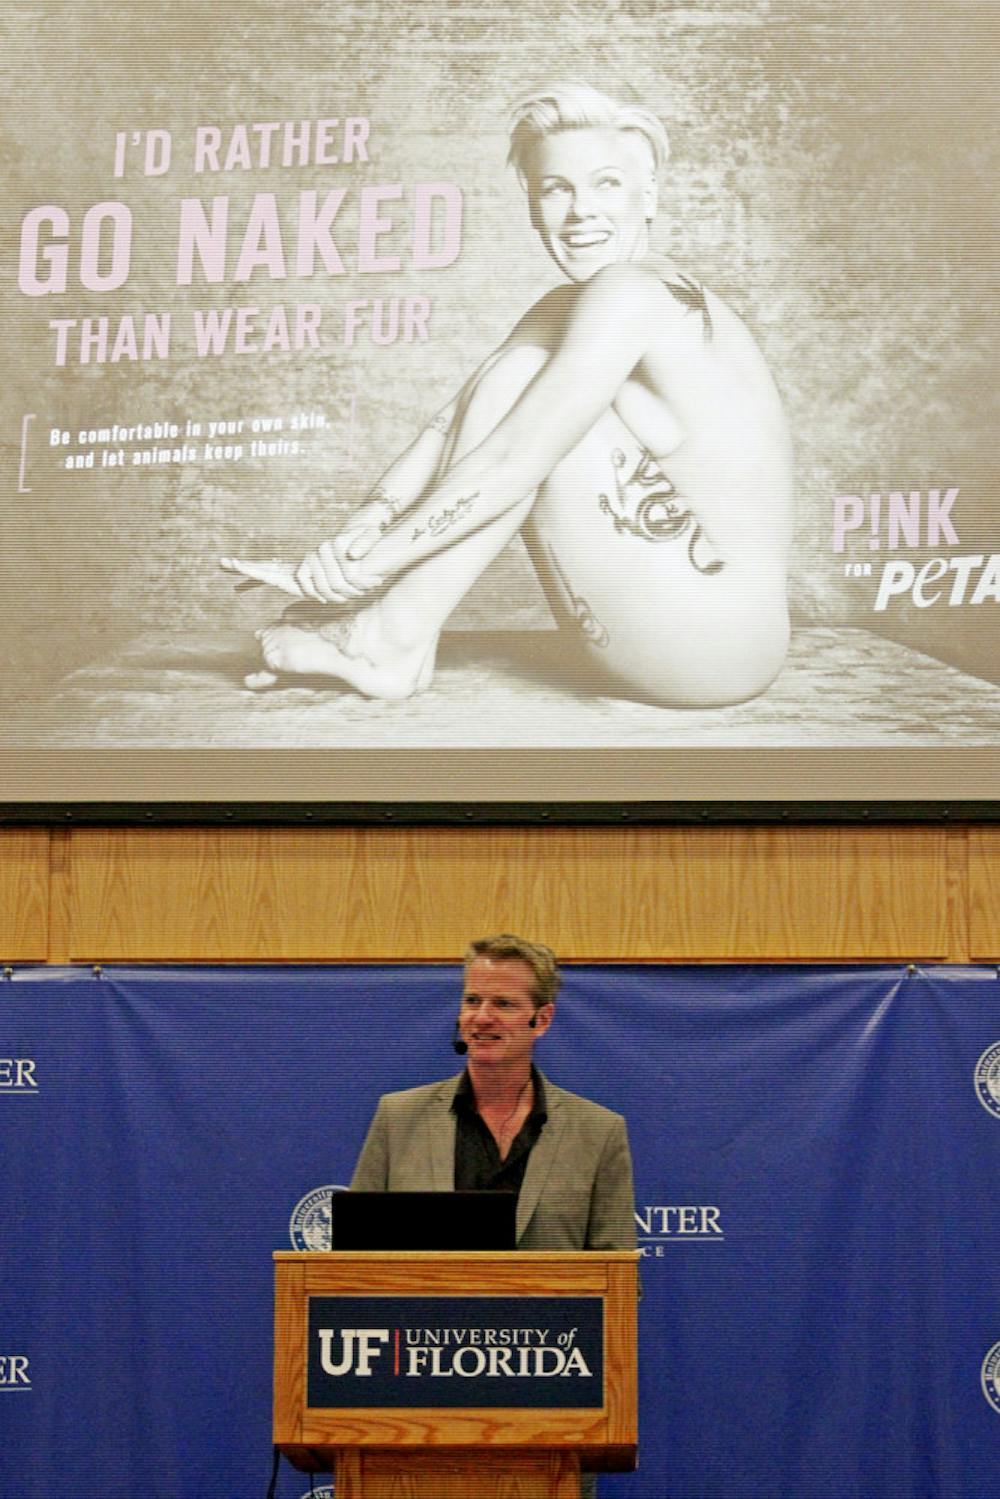 <p>Dan Mathews, senior vice president for PETA, speaks to an audience in Pugh Hall on Monday night about marketing strategies used by the organization.</p>